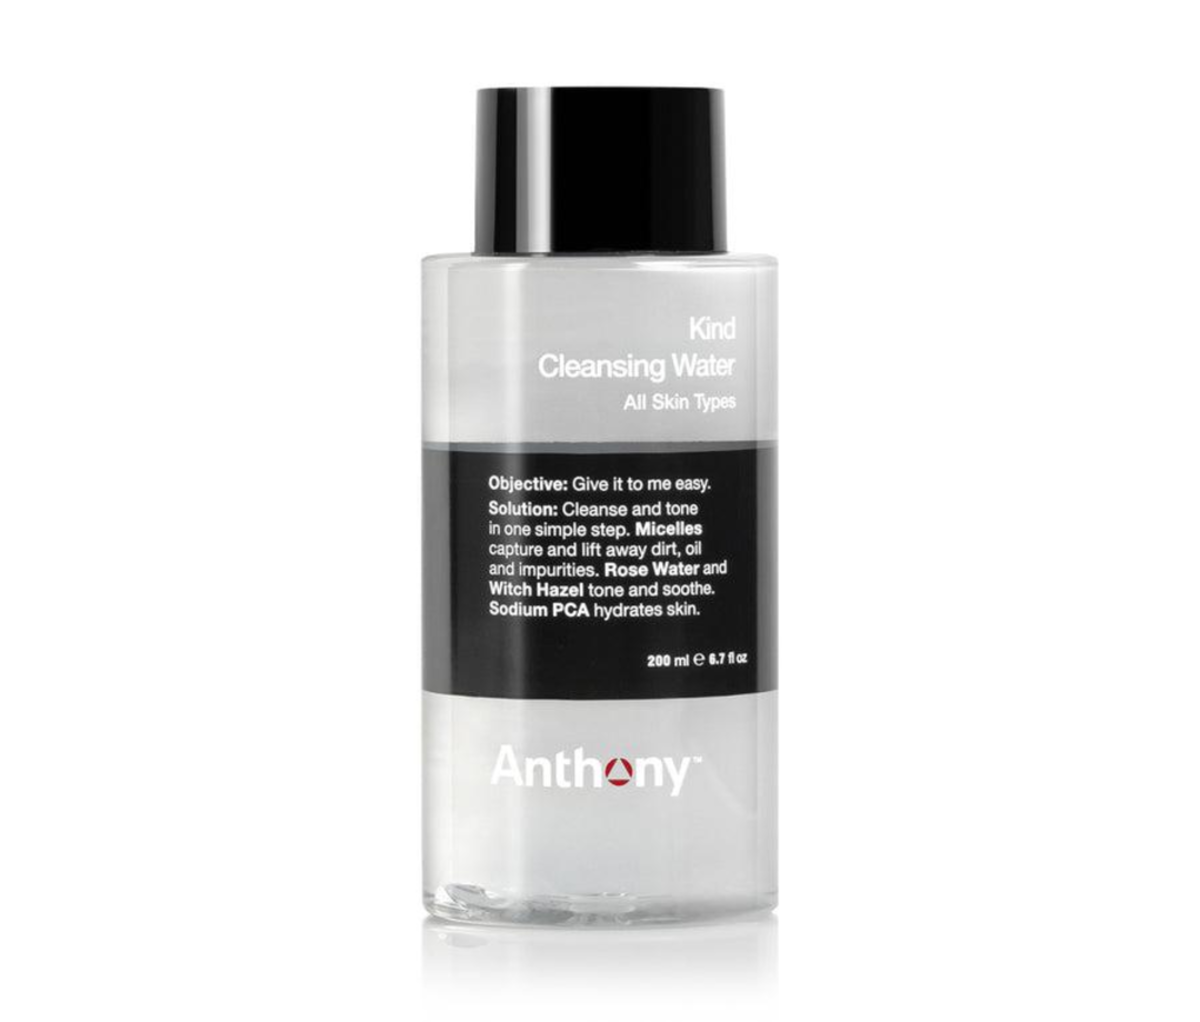 Anthony Kind Cleansing Water